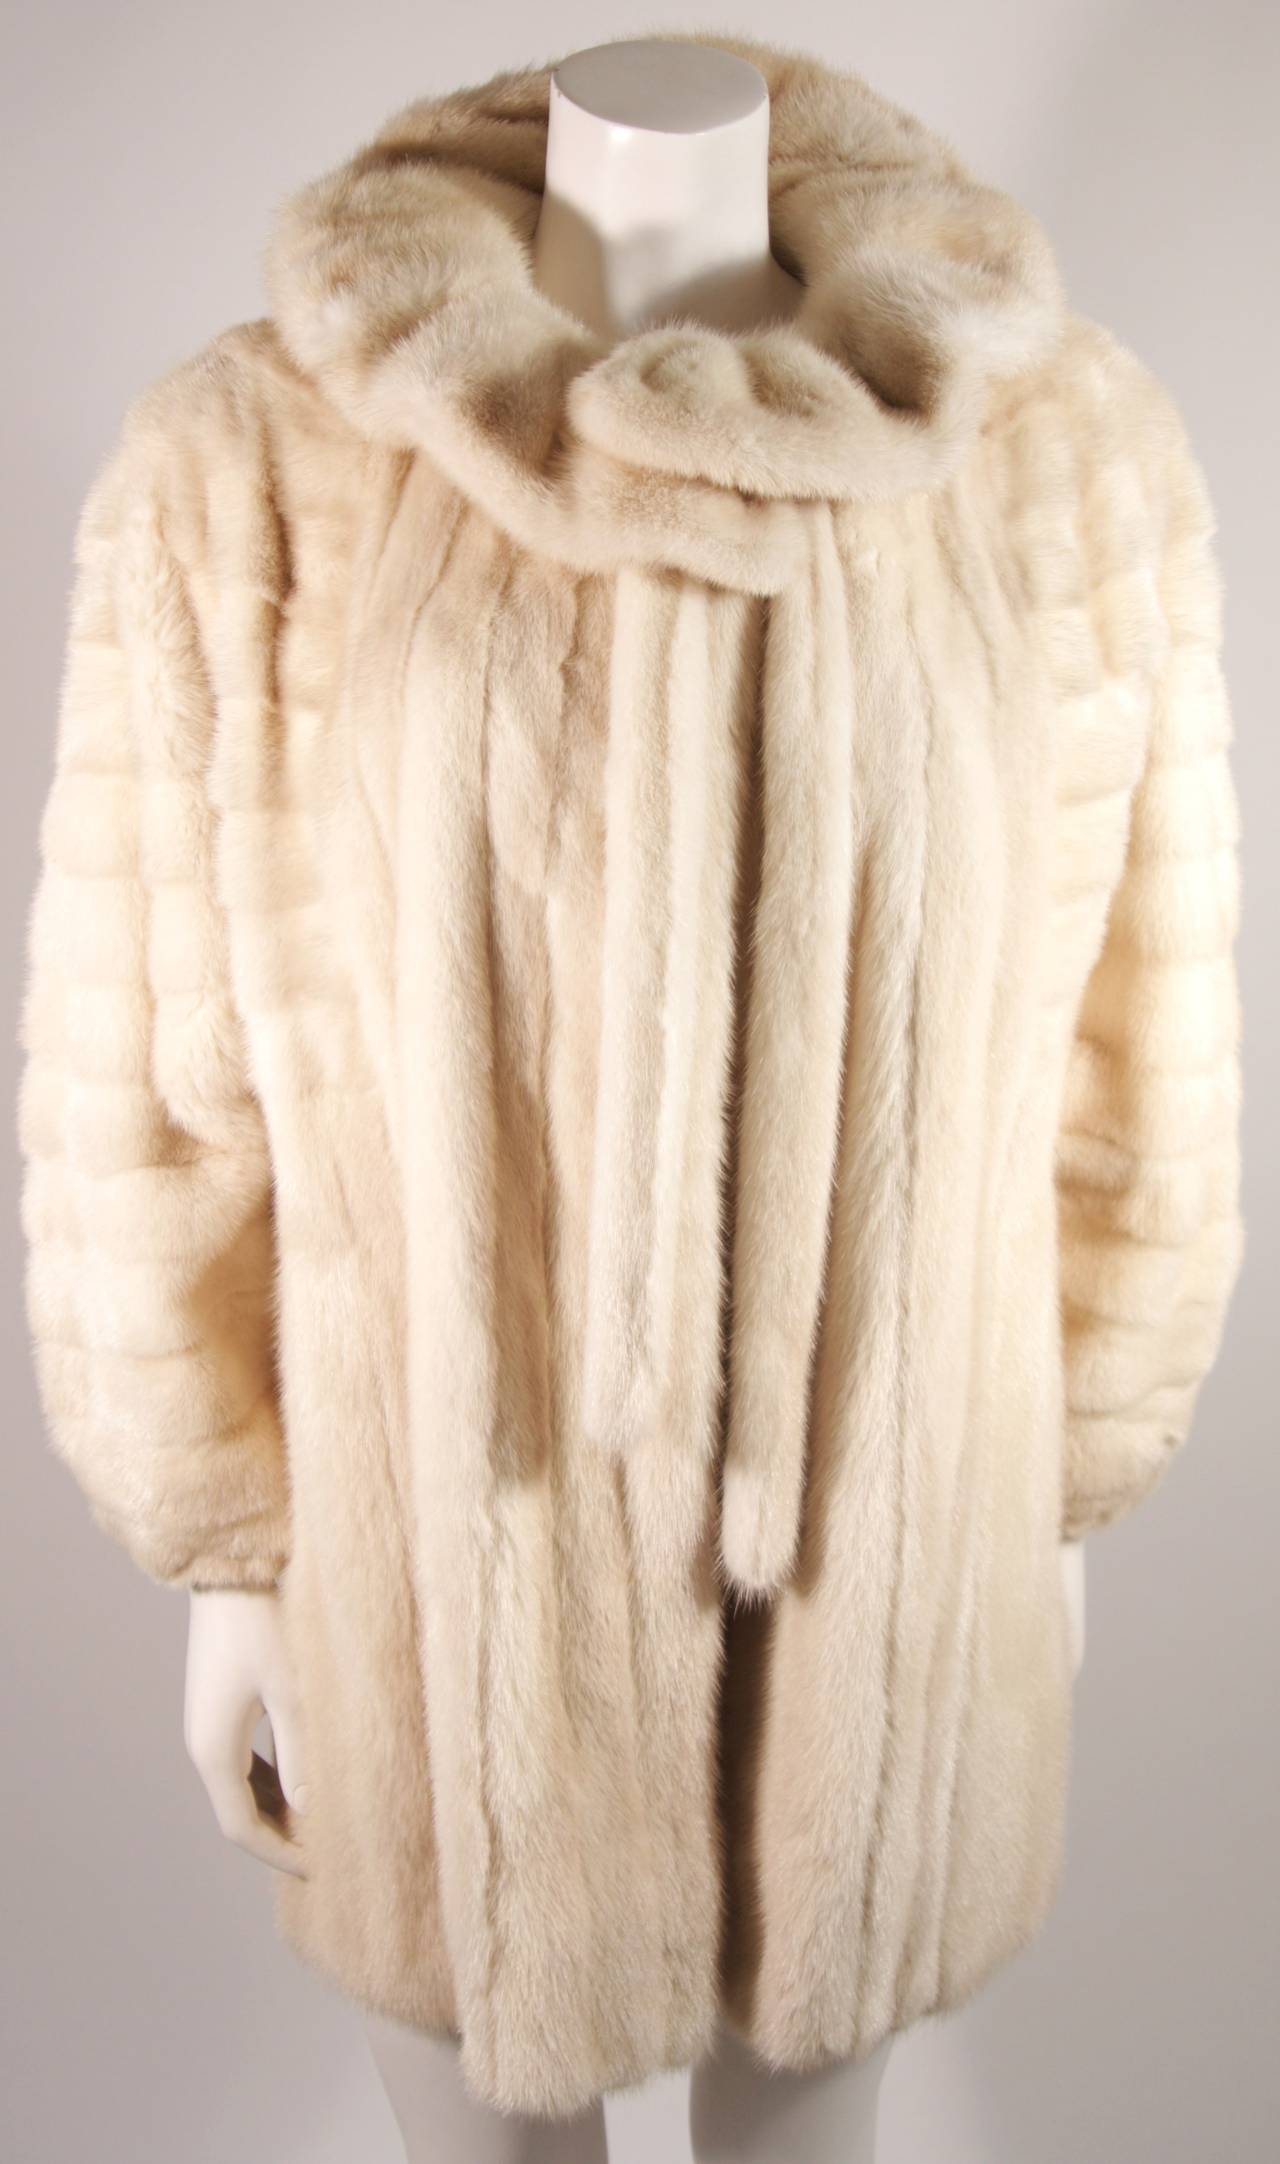 Beige Galanos Ivory Mink Coat with Ruffle Tie Collar and Full Sleeves & Stretch cuff For Sale